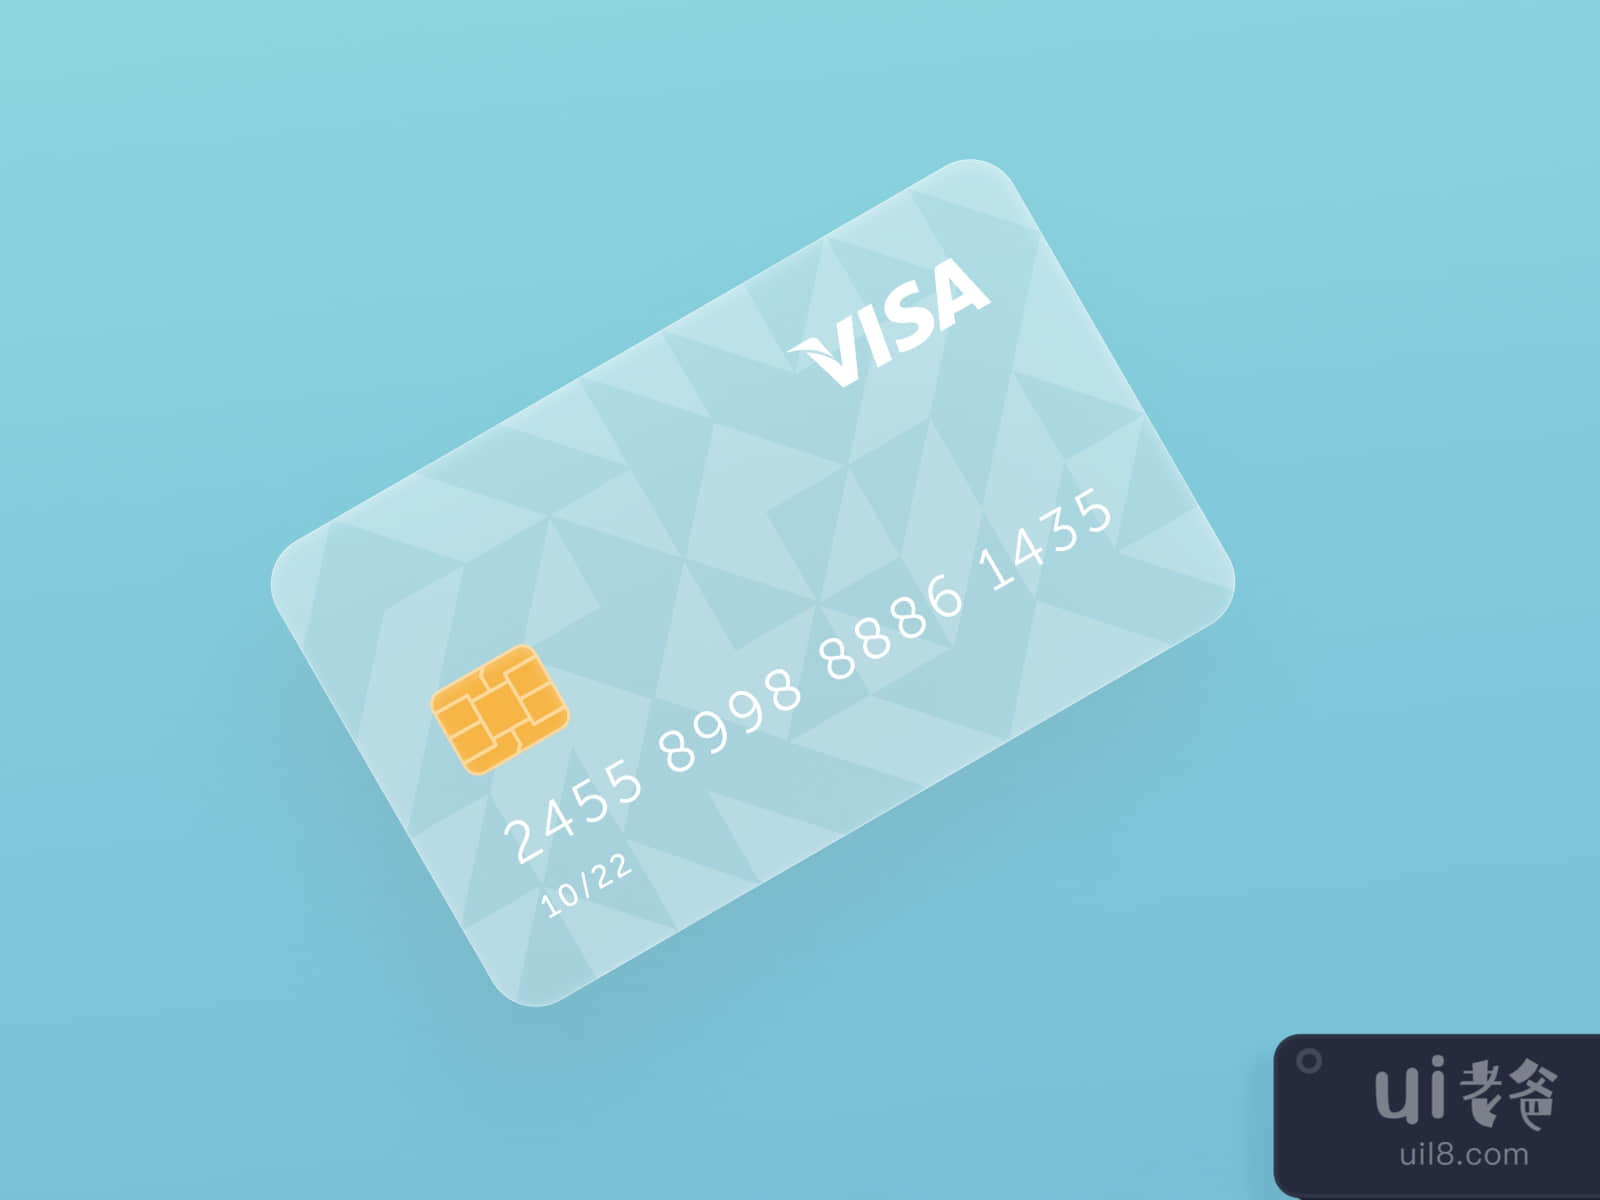 Neumorphic Bank Card for Figma and Adobe XD No 3